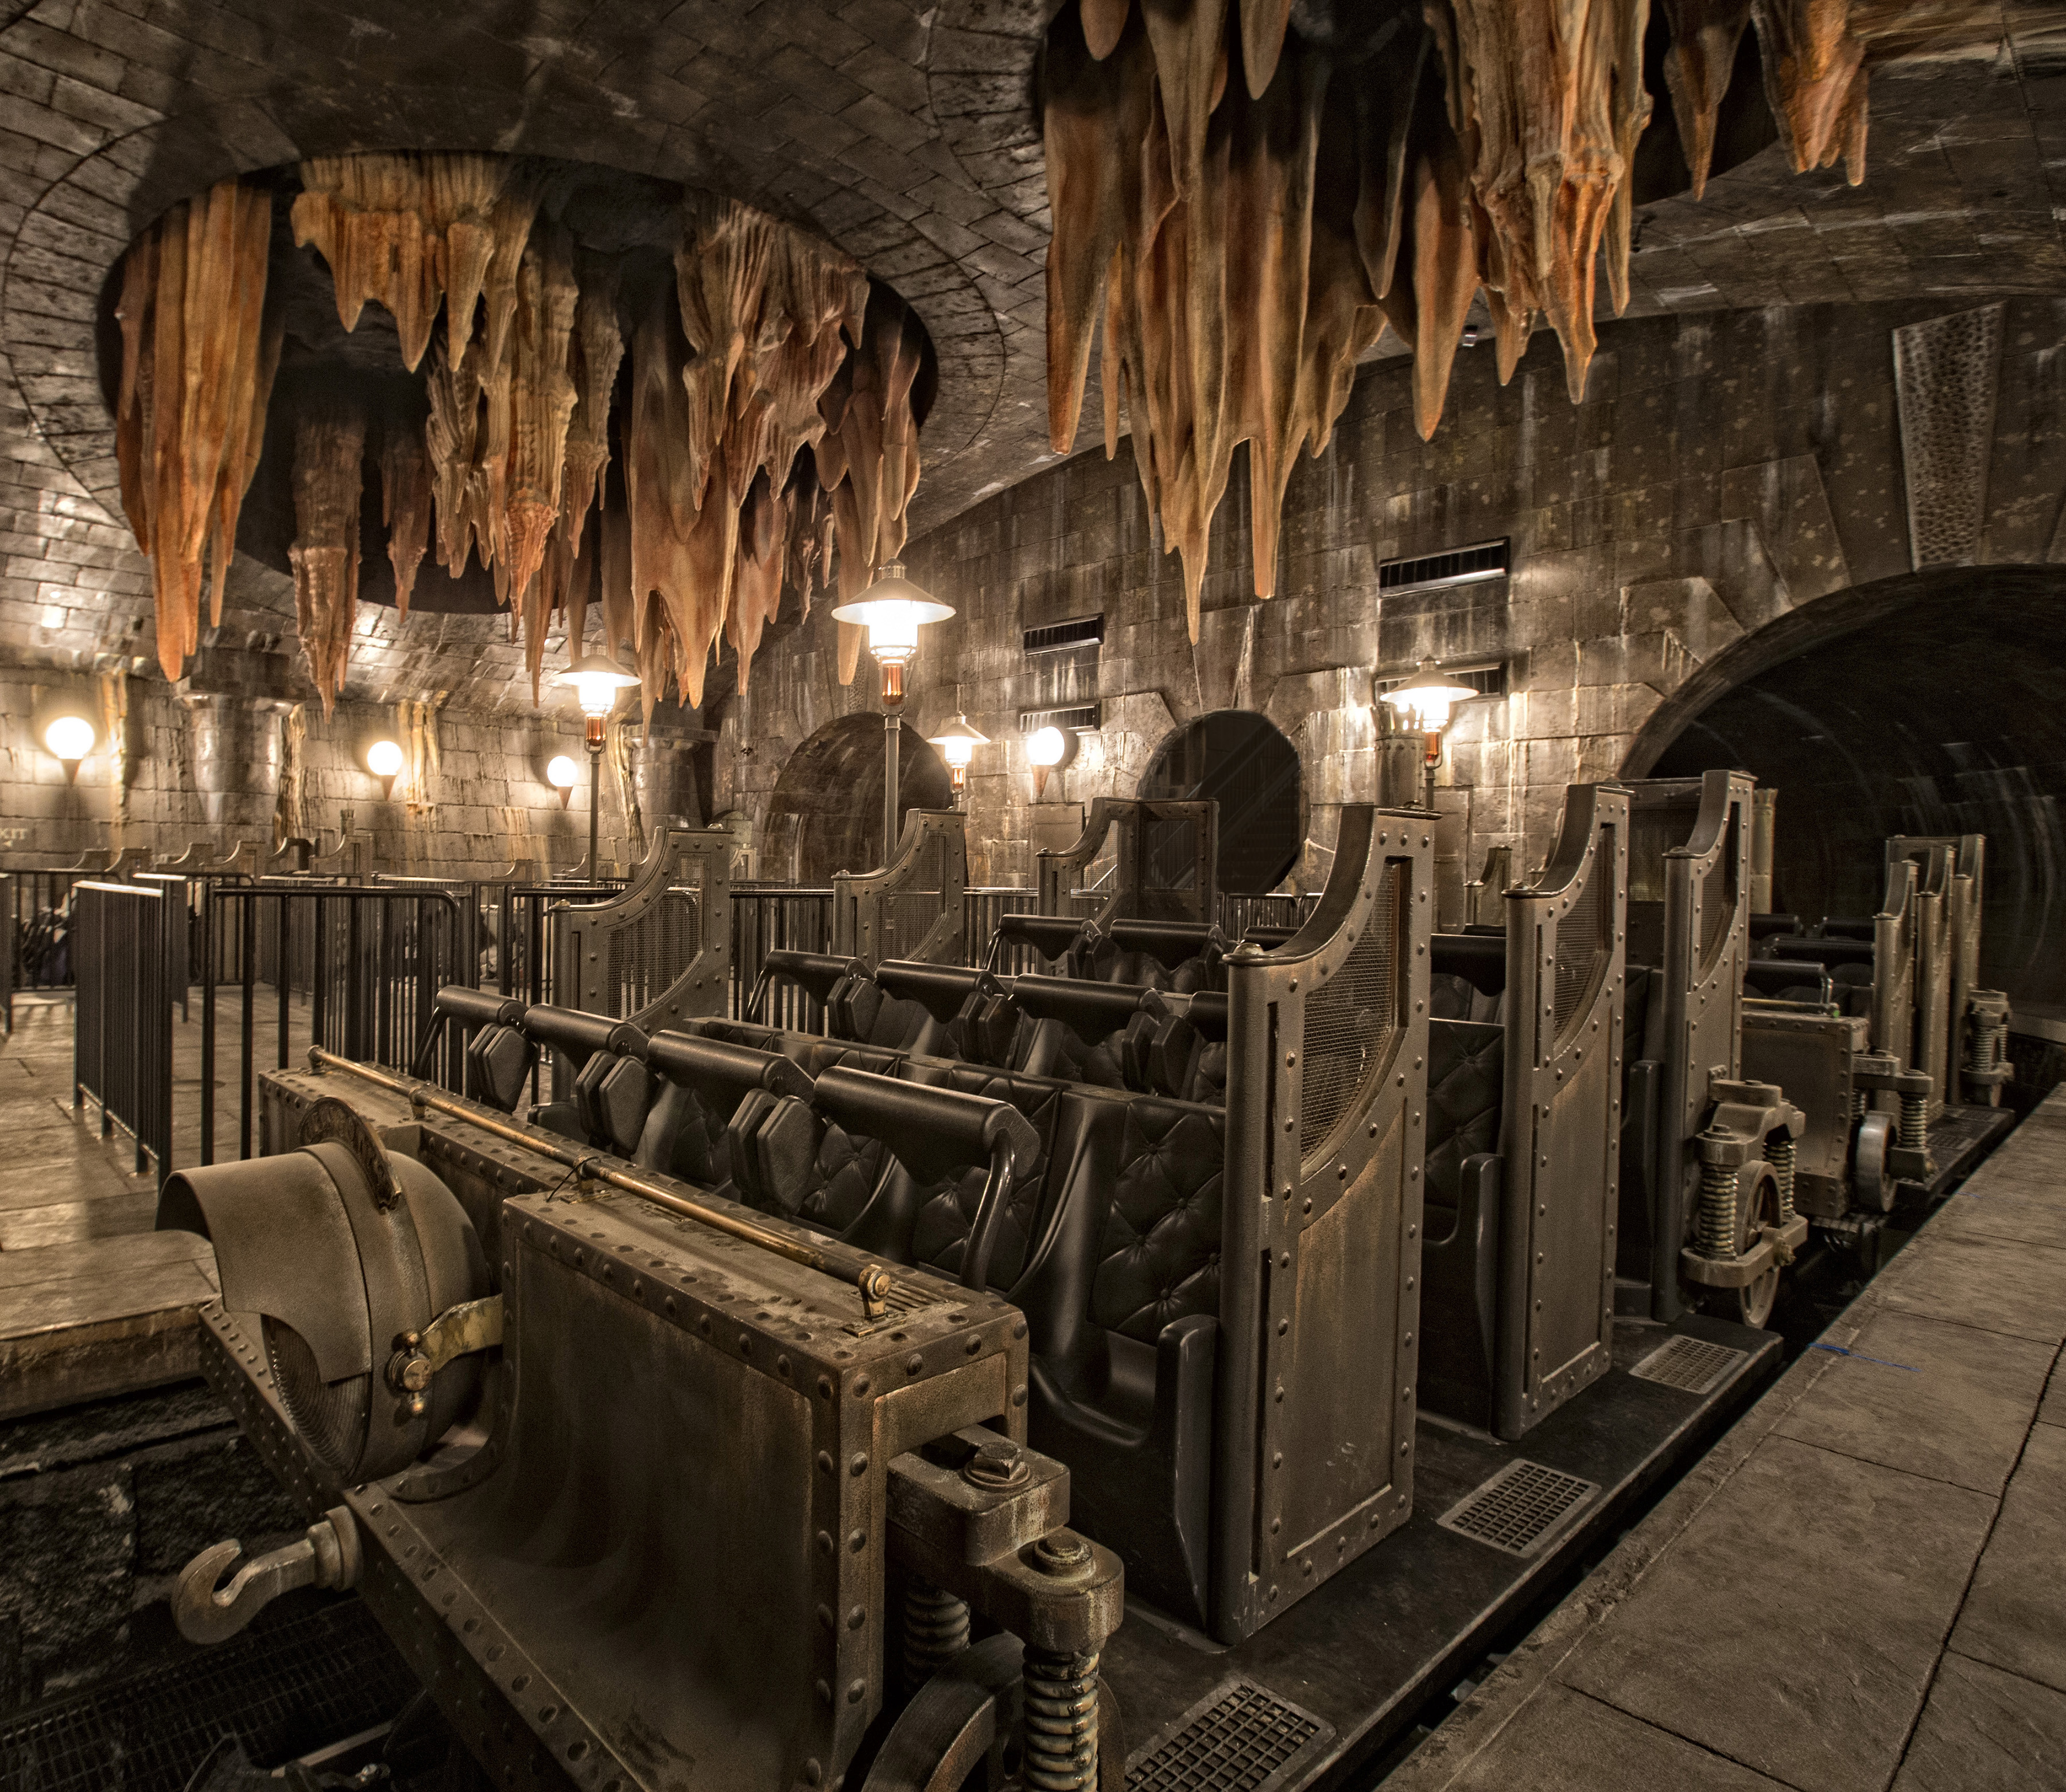 Harry Potter and the Escape from Gringotts ride vehicle